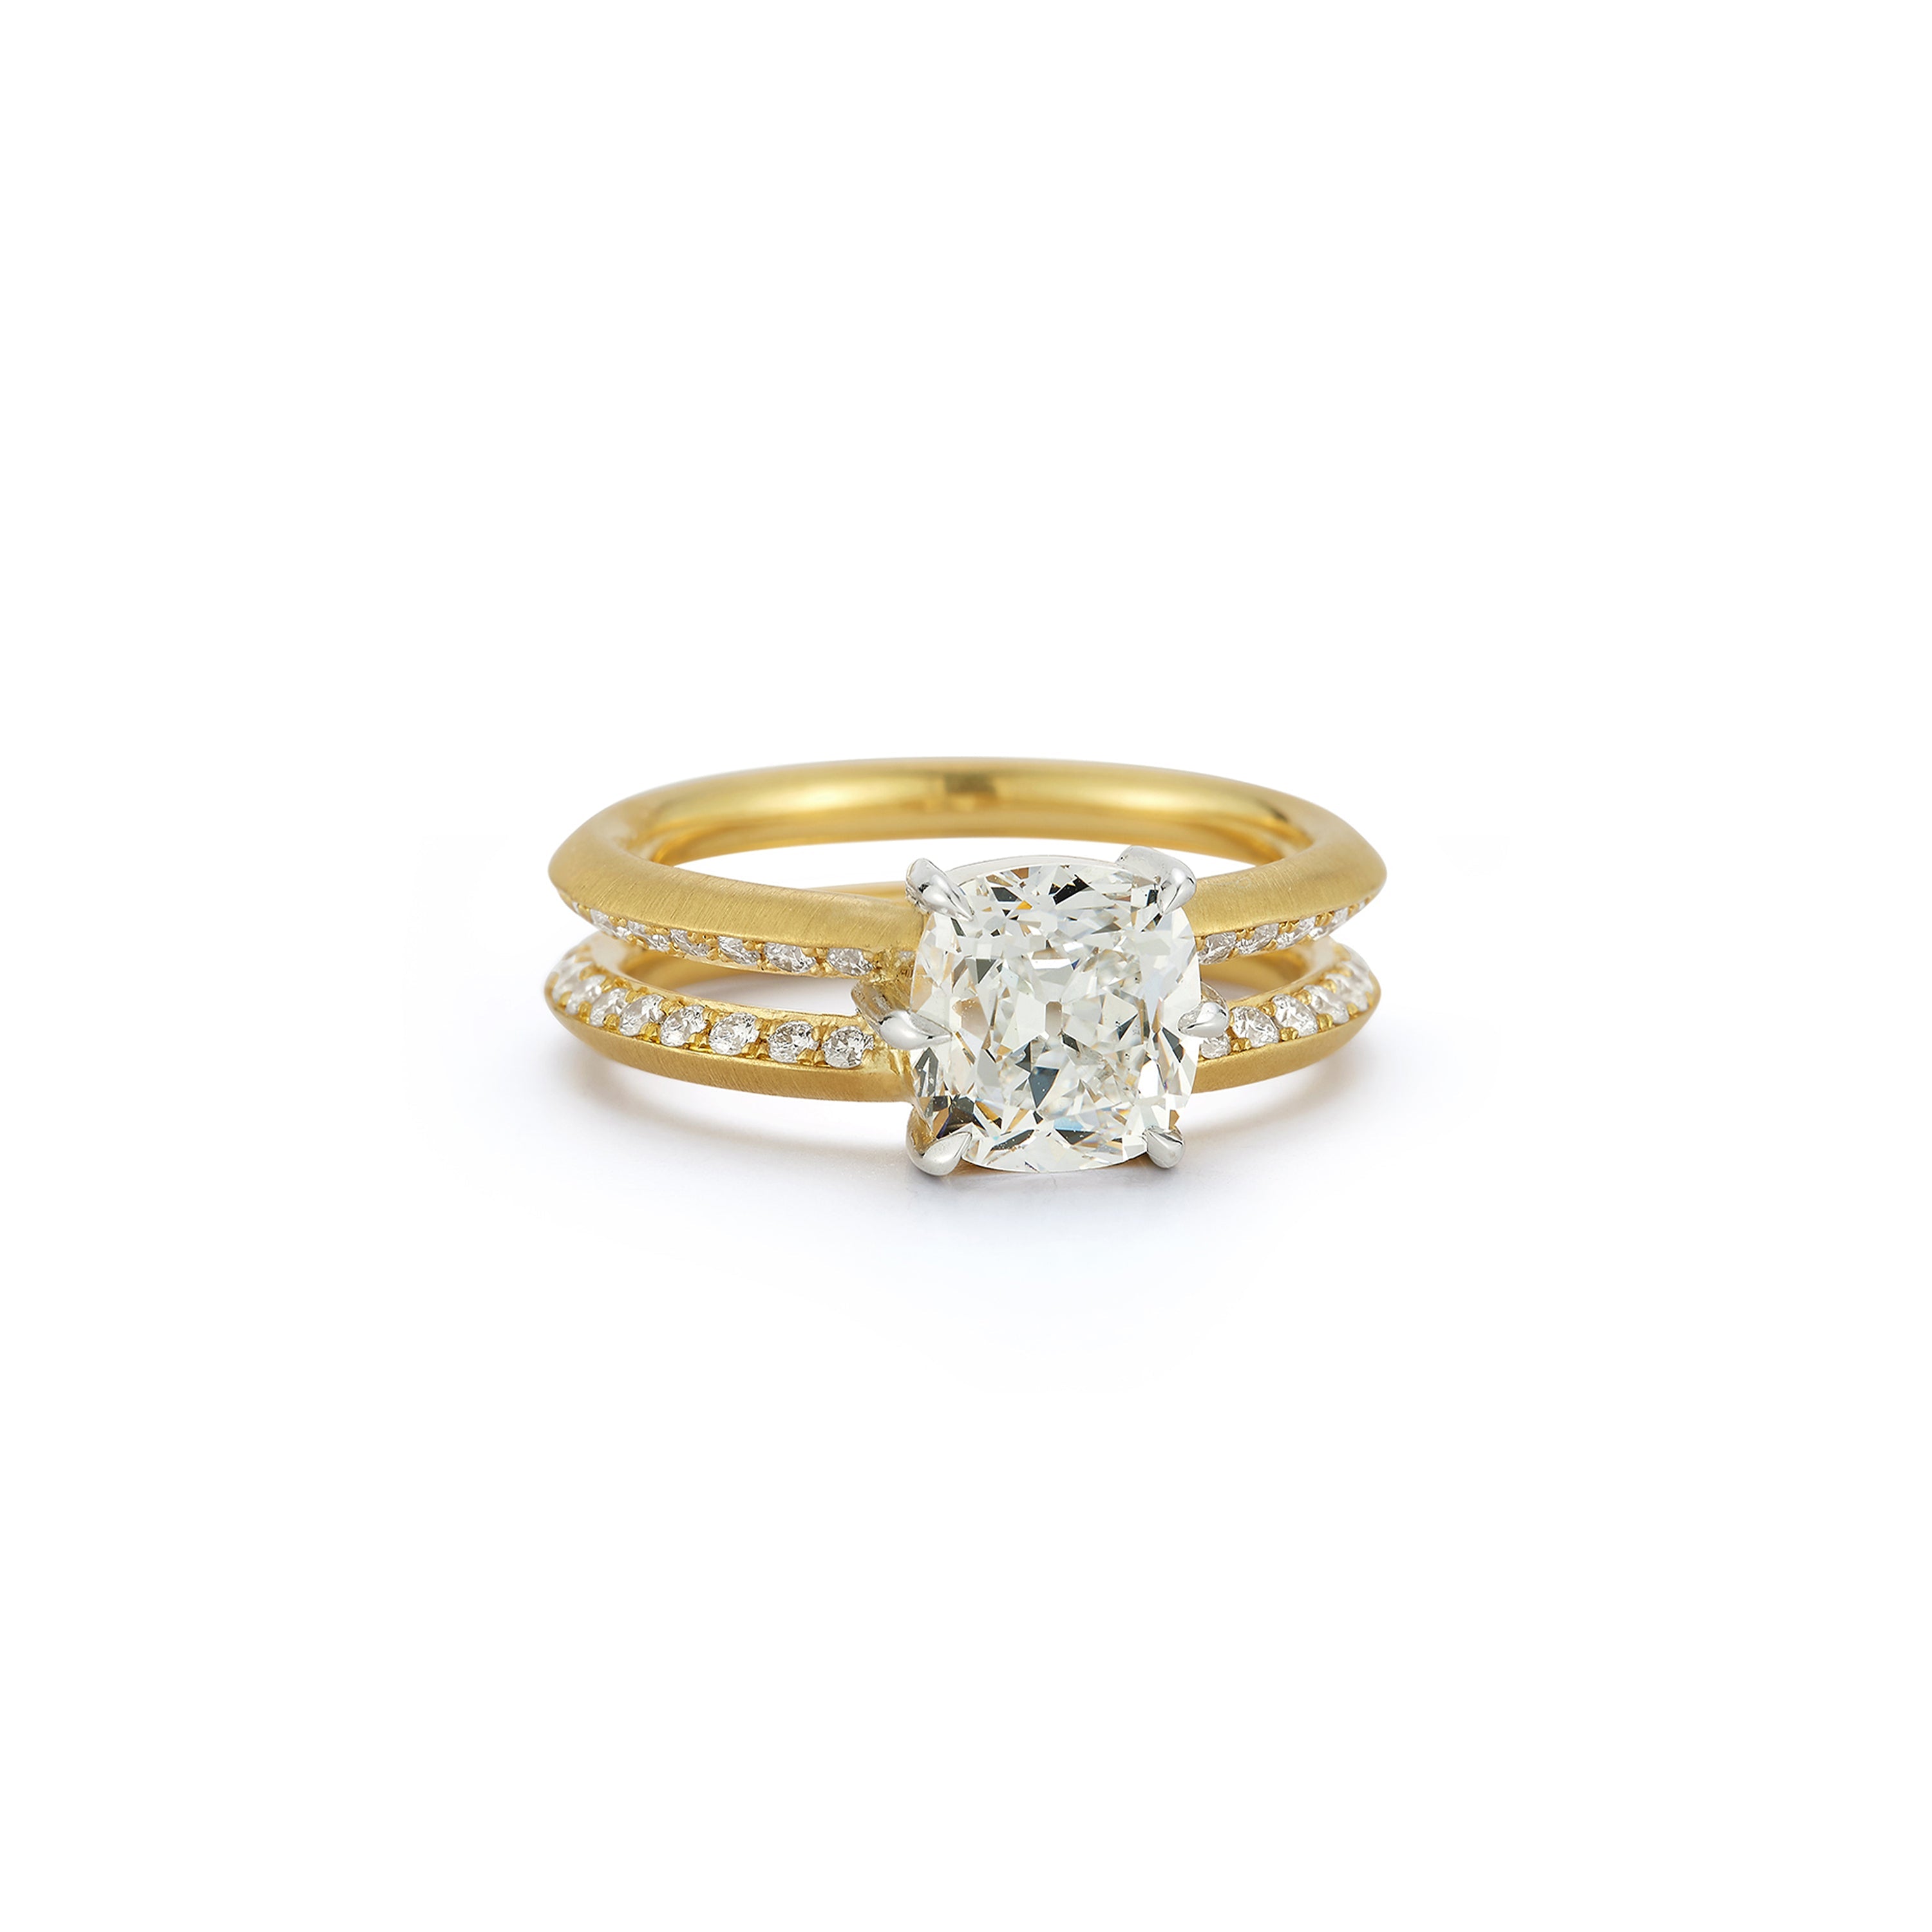 The Ari Ring For Him- Diamond Jewellery at Best Prices in India |  SarvadaJewels.com